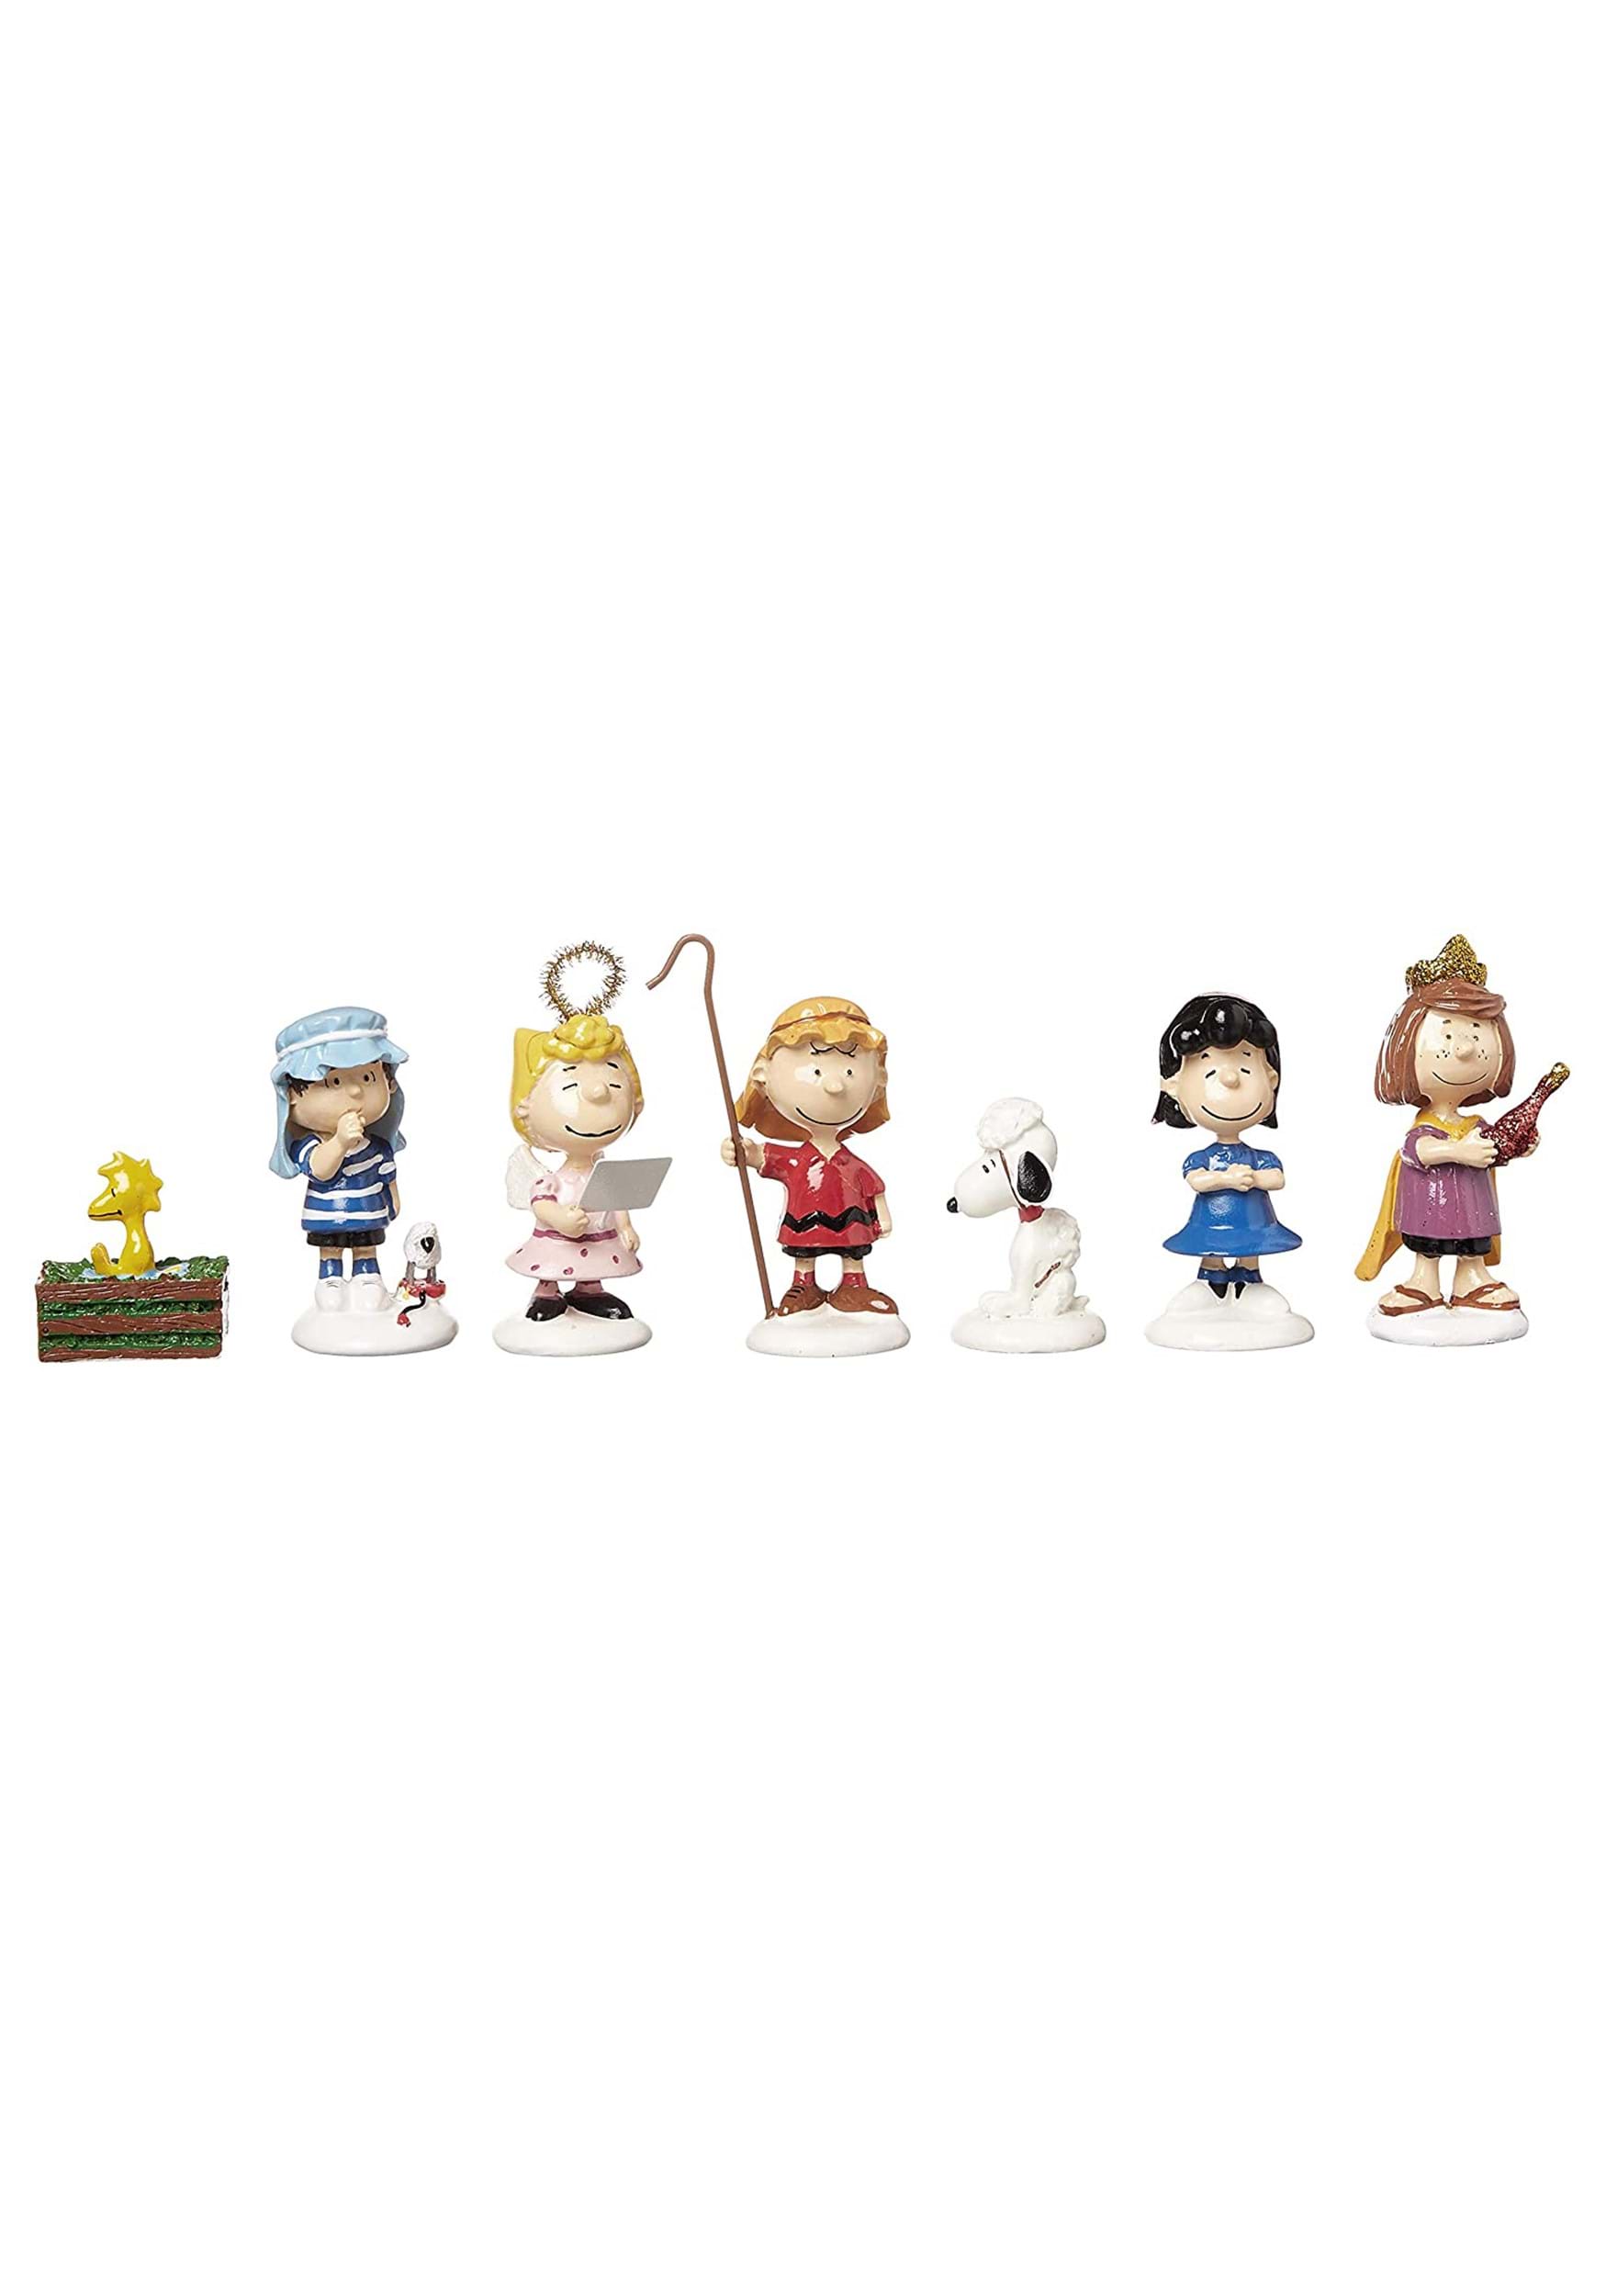 https://images.fun.com/products/84095/2-1-235328/peanuts-christmas-pageant-statue-set-alt-1.jpg